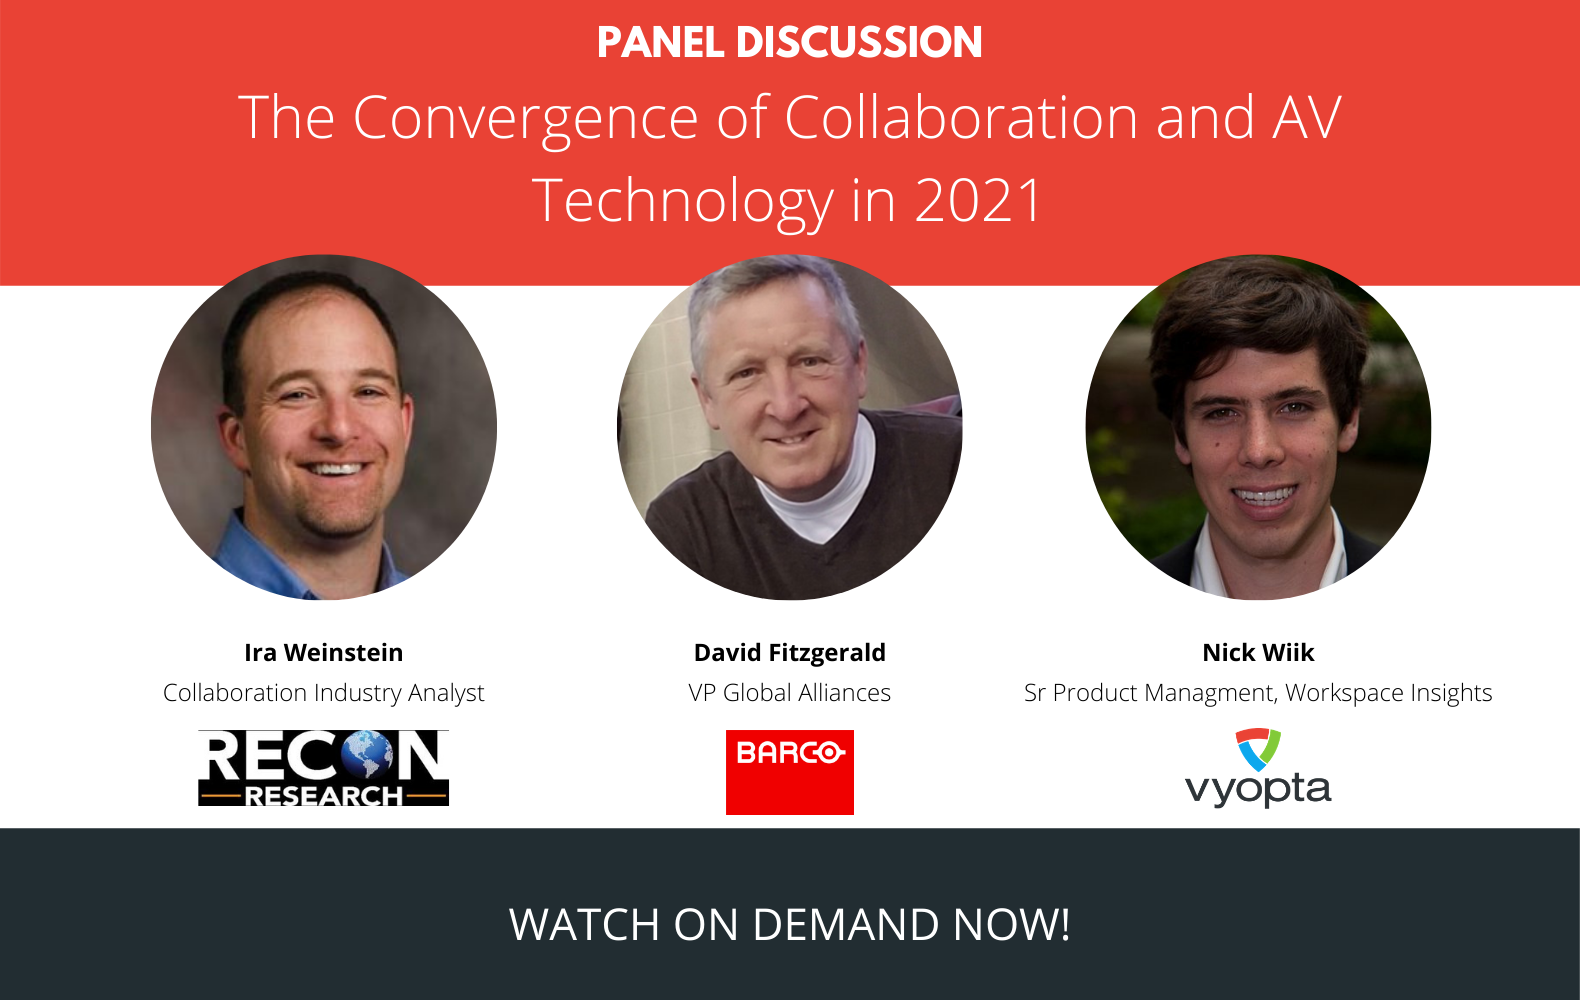 Panel Discussion: The Convergence of Collaboration and AV Technology in 2021